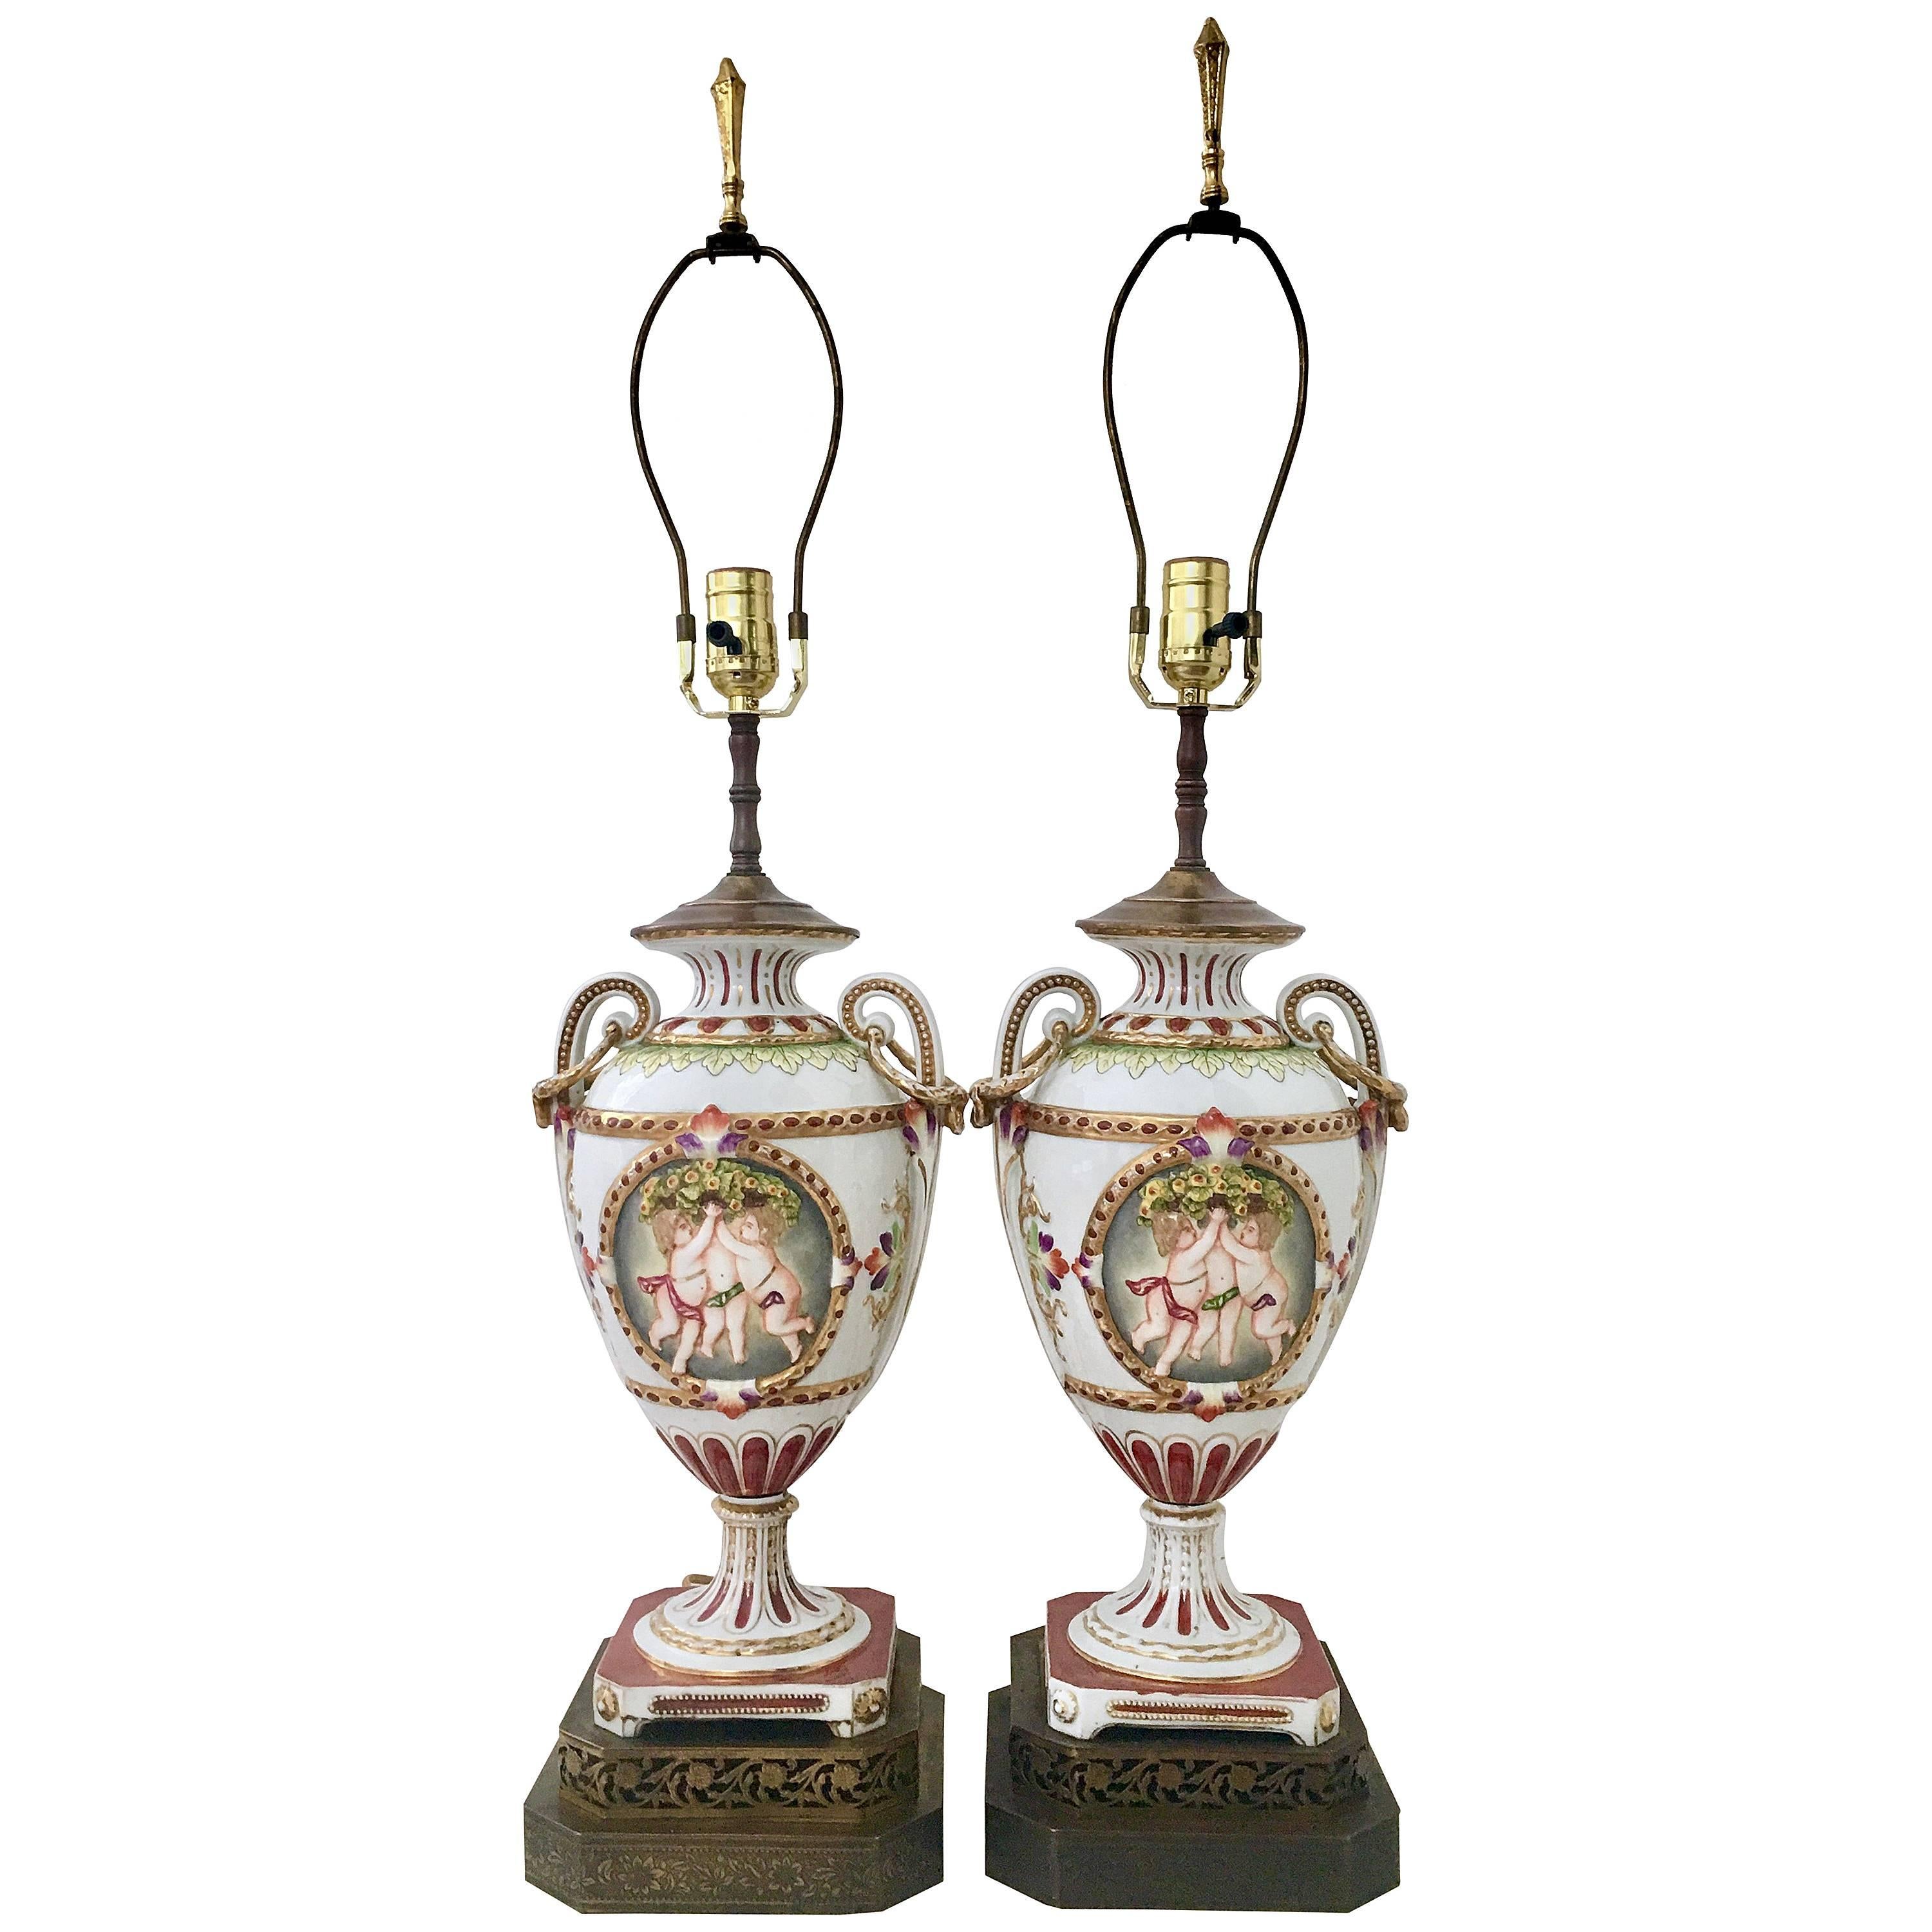 19th Century Pair Of Royal Vienna Style Porcelain Hand-Painted Portrait Lamps For Sale